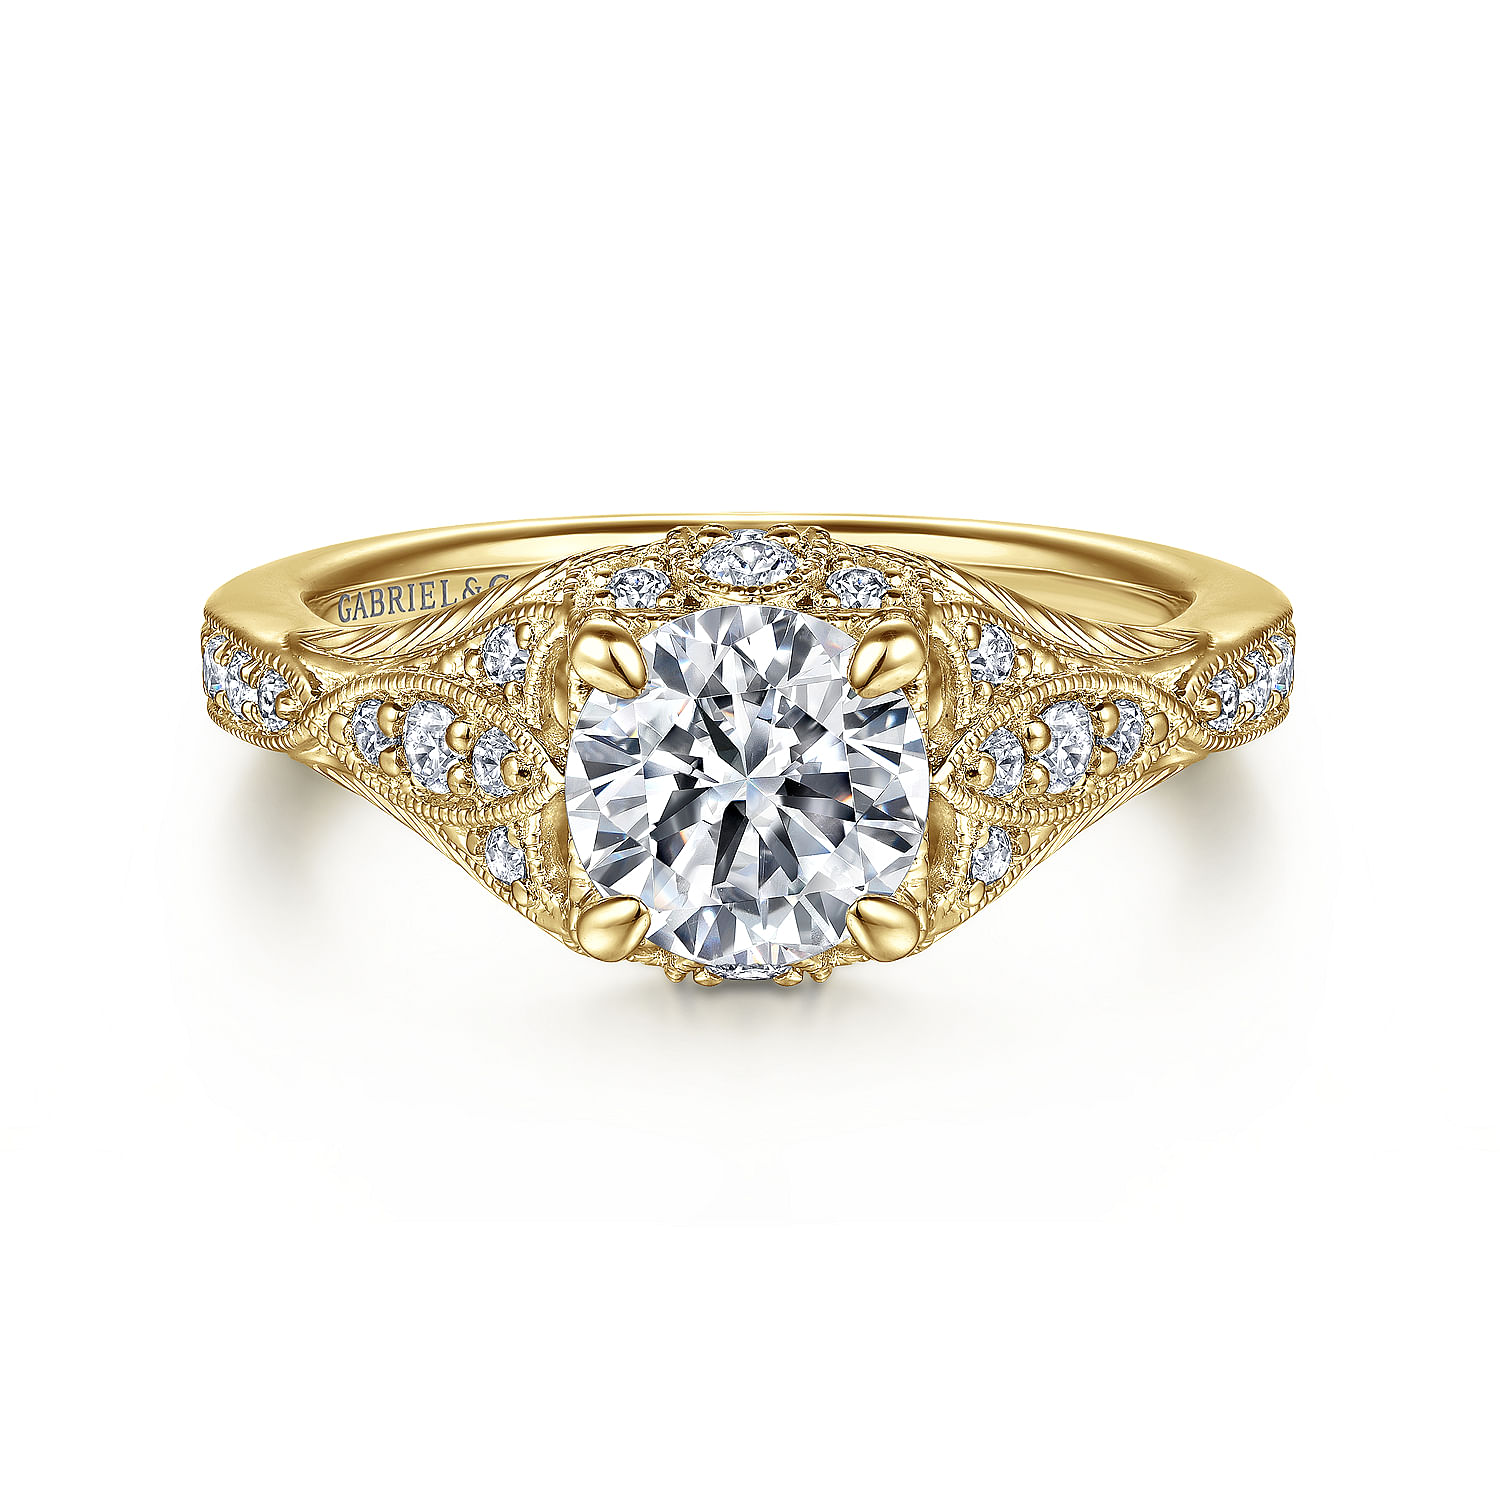 Windsor - Unique 14K Yellow Gold Vintage Inspired Diamond Halo Engagement Ring